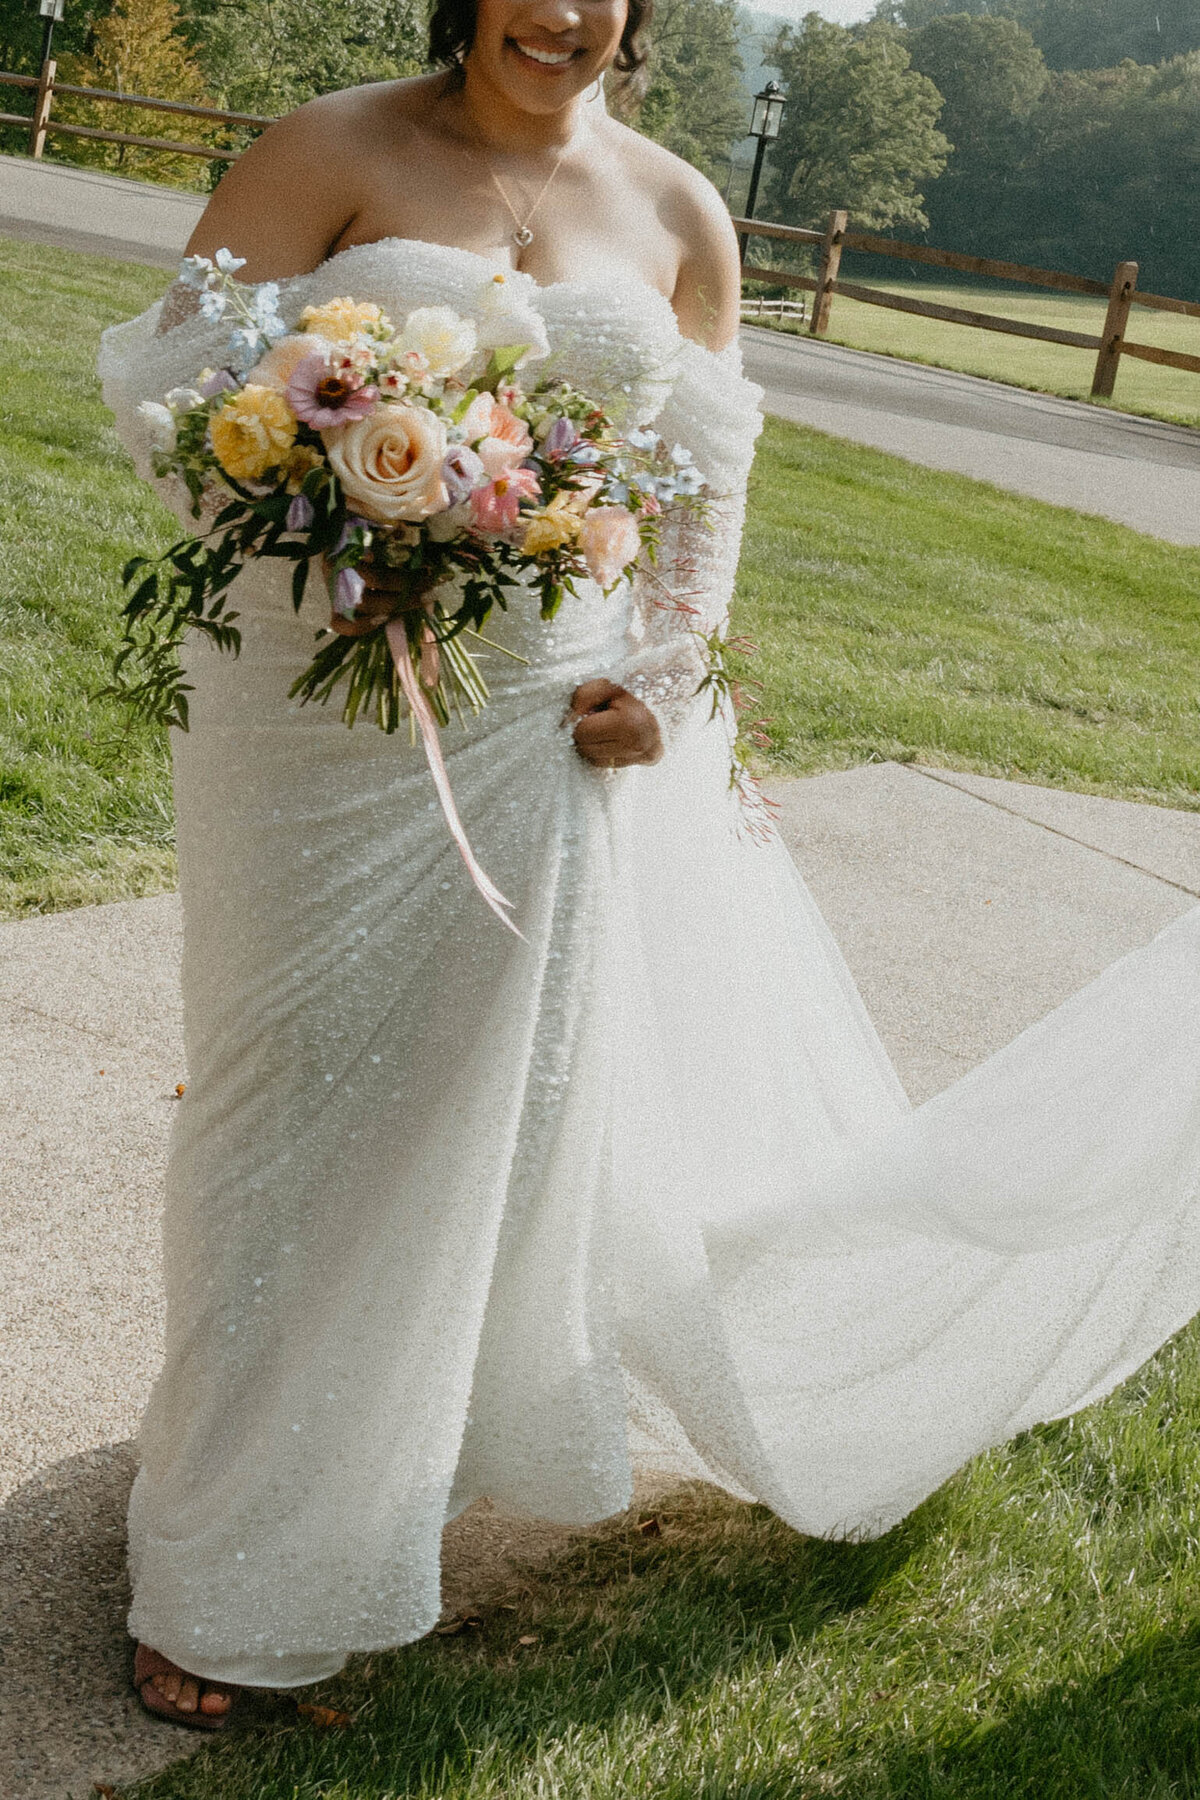 Bride holding bouquet after luxury wedding ceremony